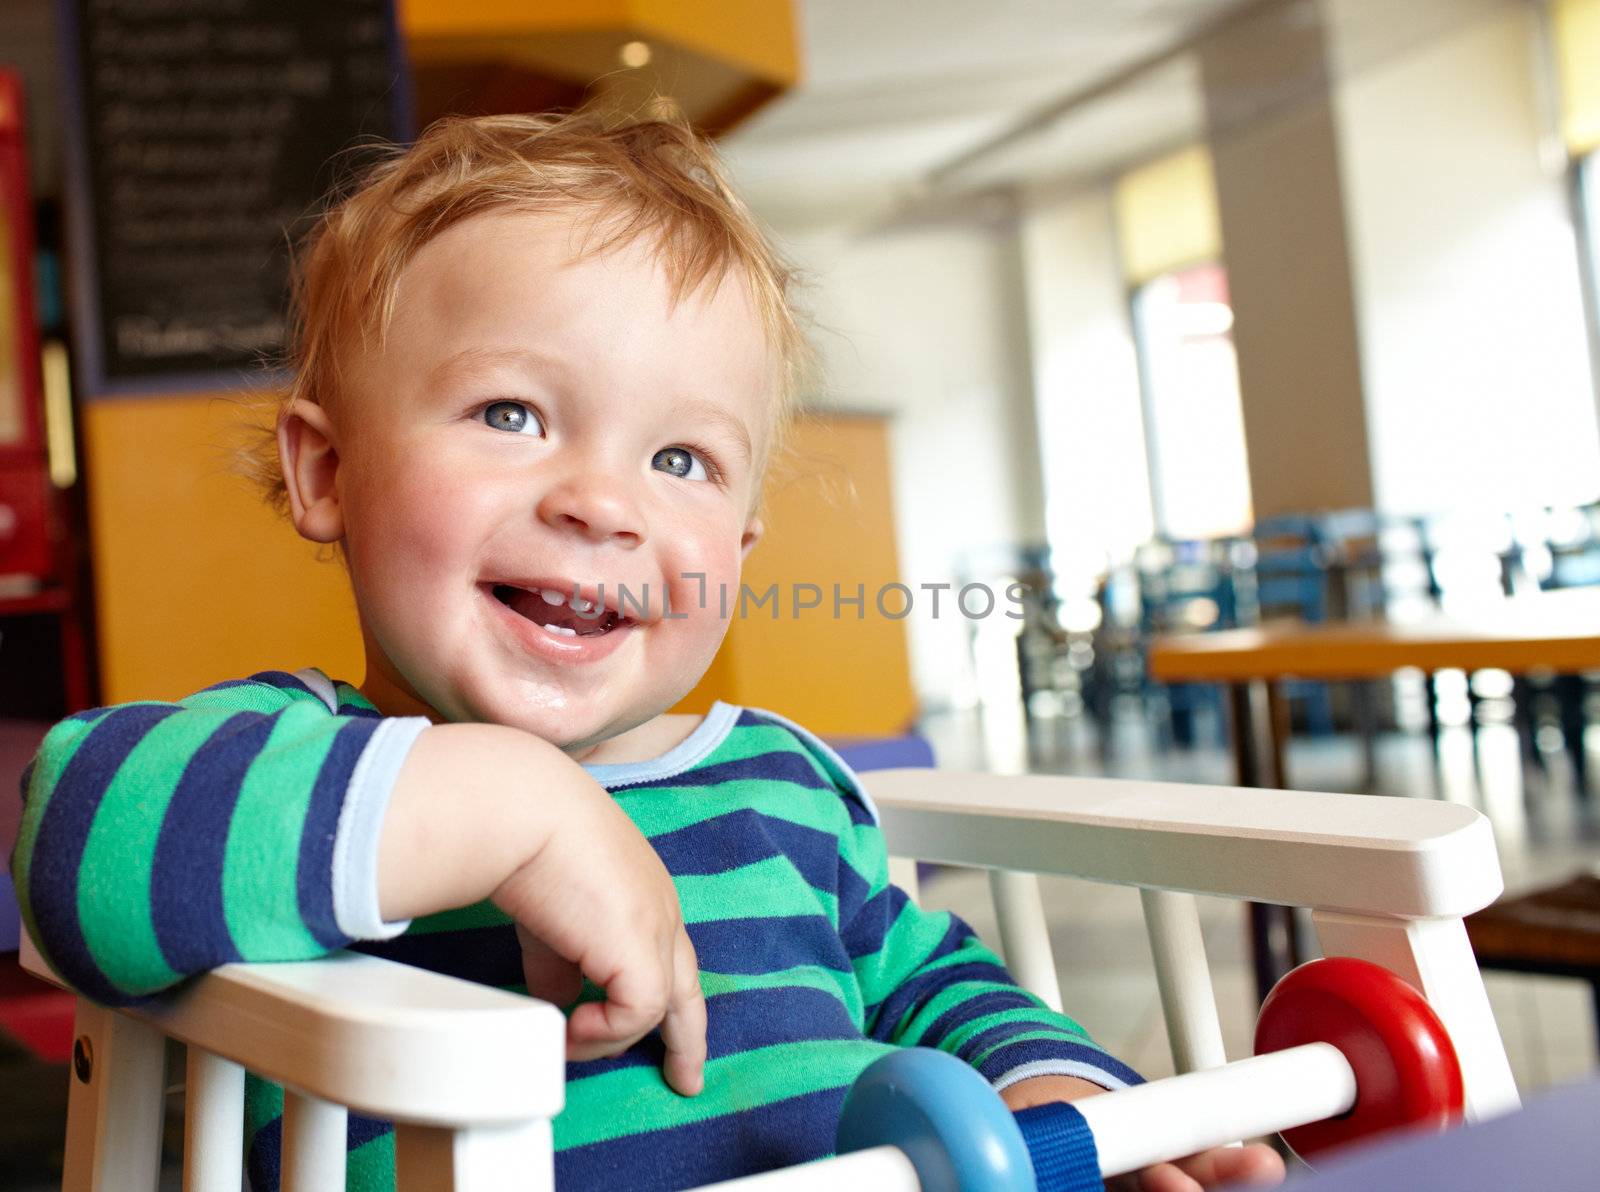 Cute boy having delicious lunch in restaurant and laughing. Natural bright colors.